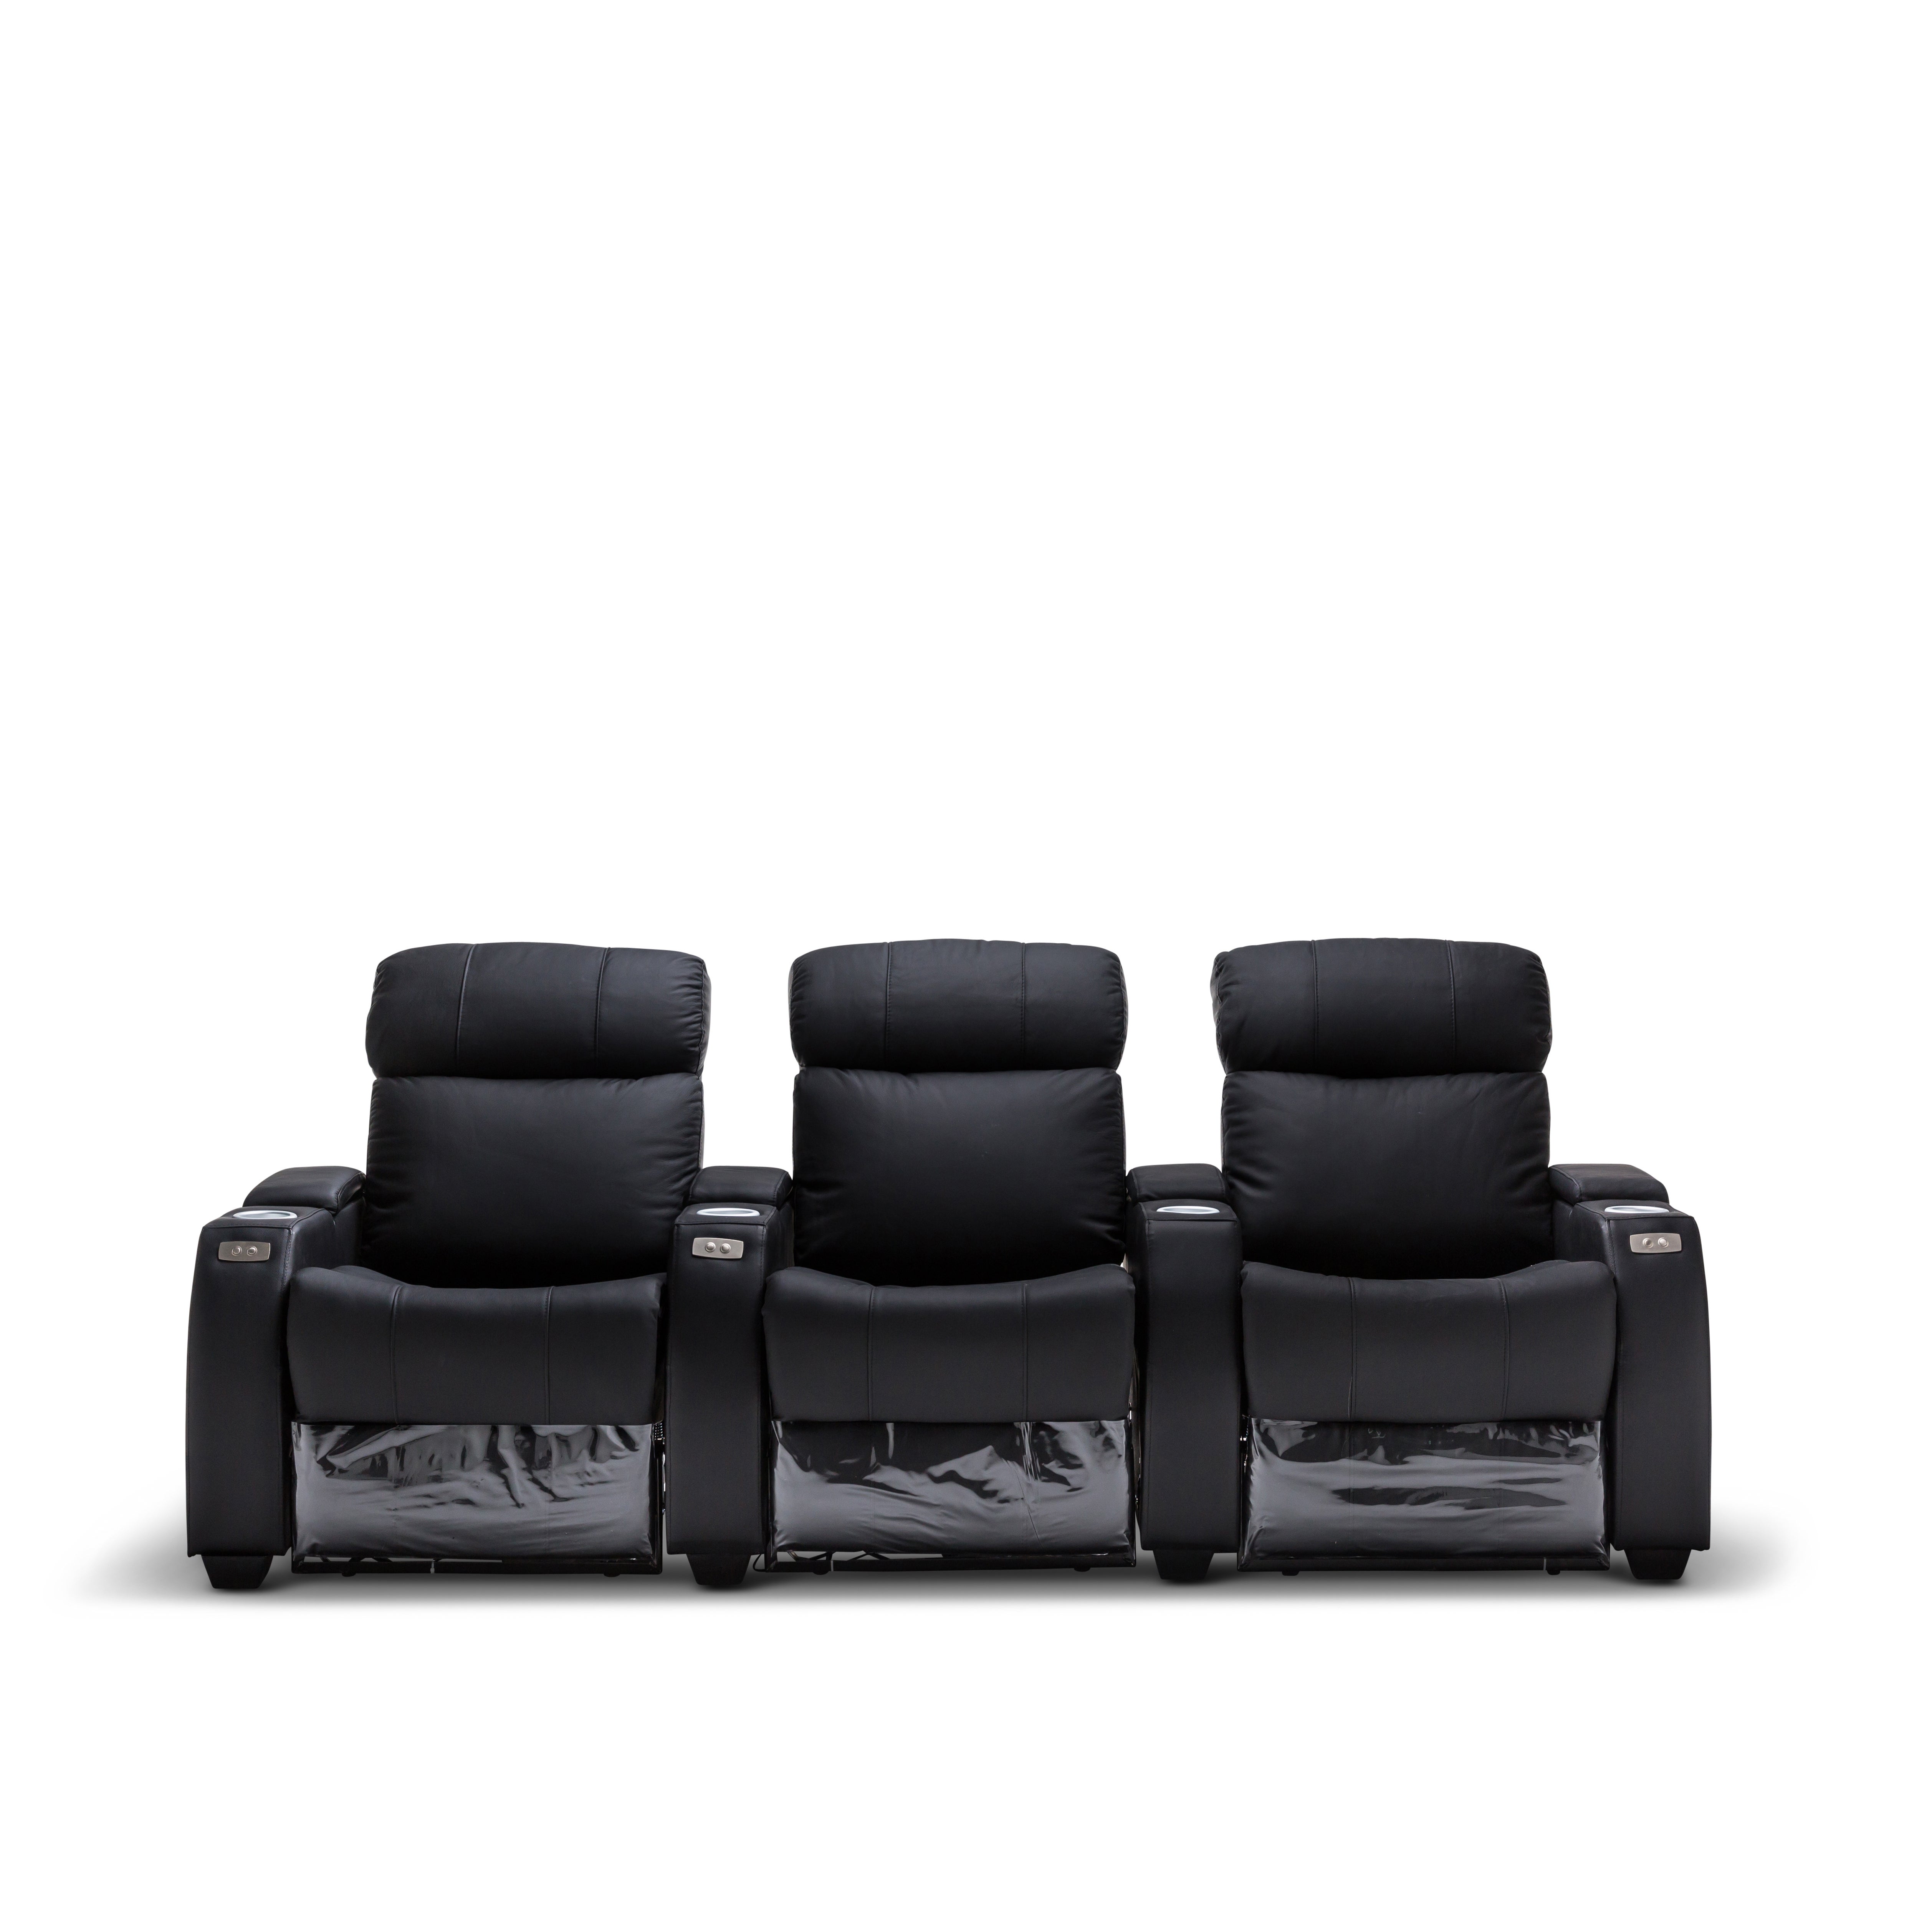 Anna Black Leather Electric Recliner Home theatre Lounge Suite - 3 Seater